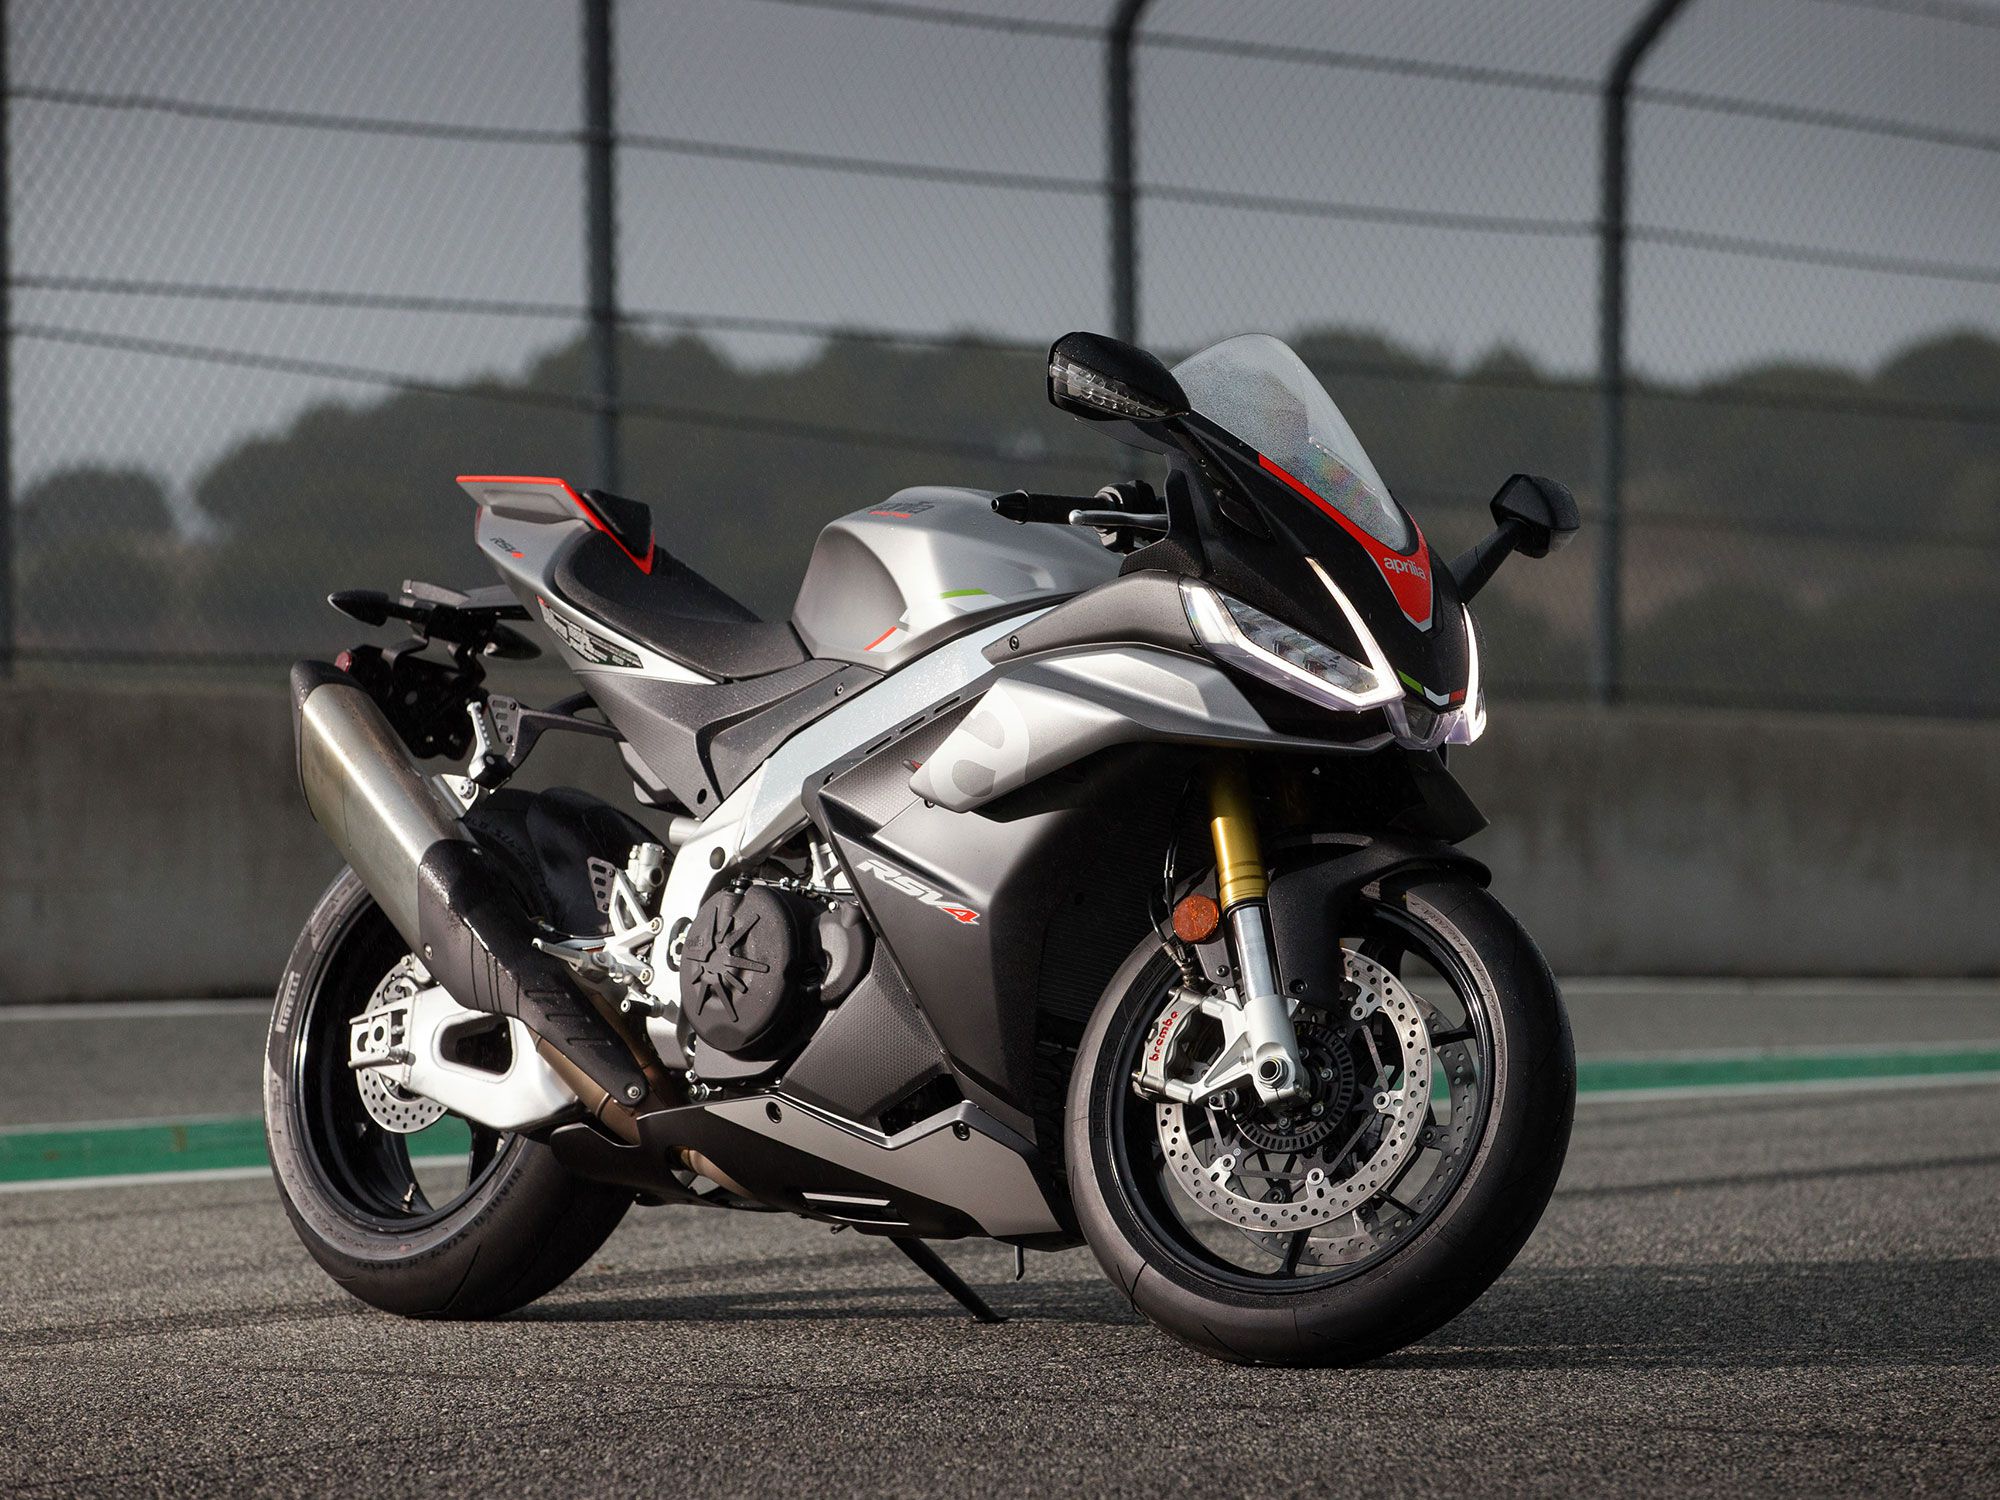 Say hello to the 2021 Aprilia RSV4. It finally incorporates full LED lighting and an updated profile that follows the form of its recently expanded three-bike sportbike lineup (RS 660, RSV4, RSV4 Factory).